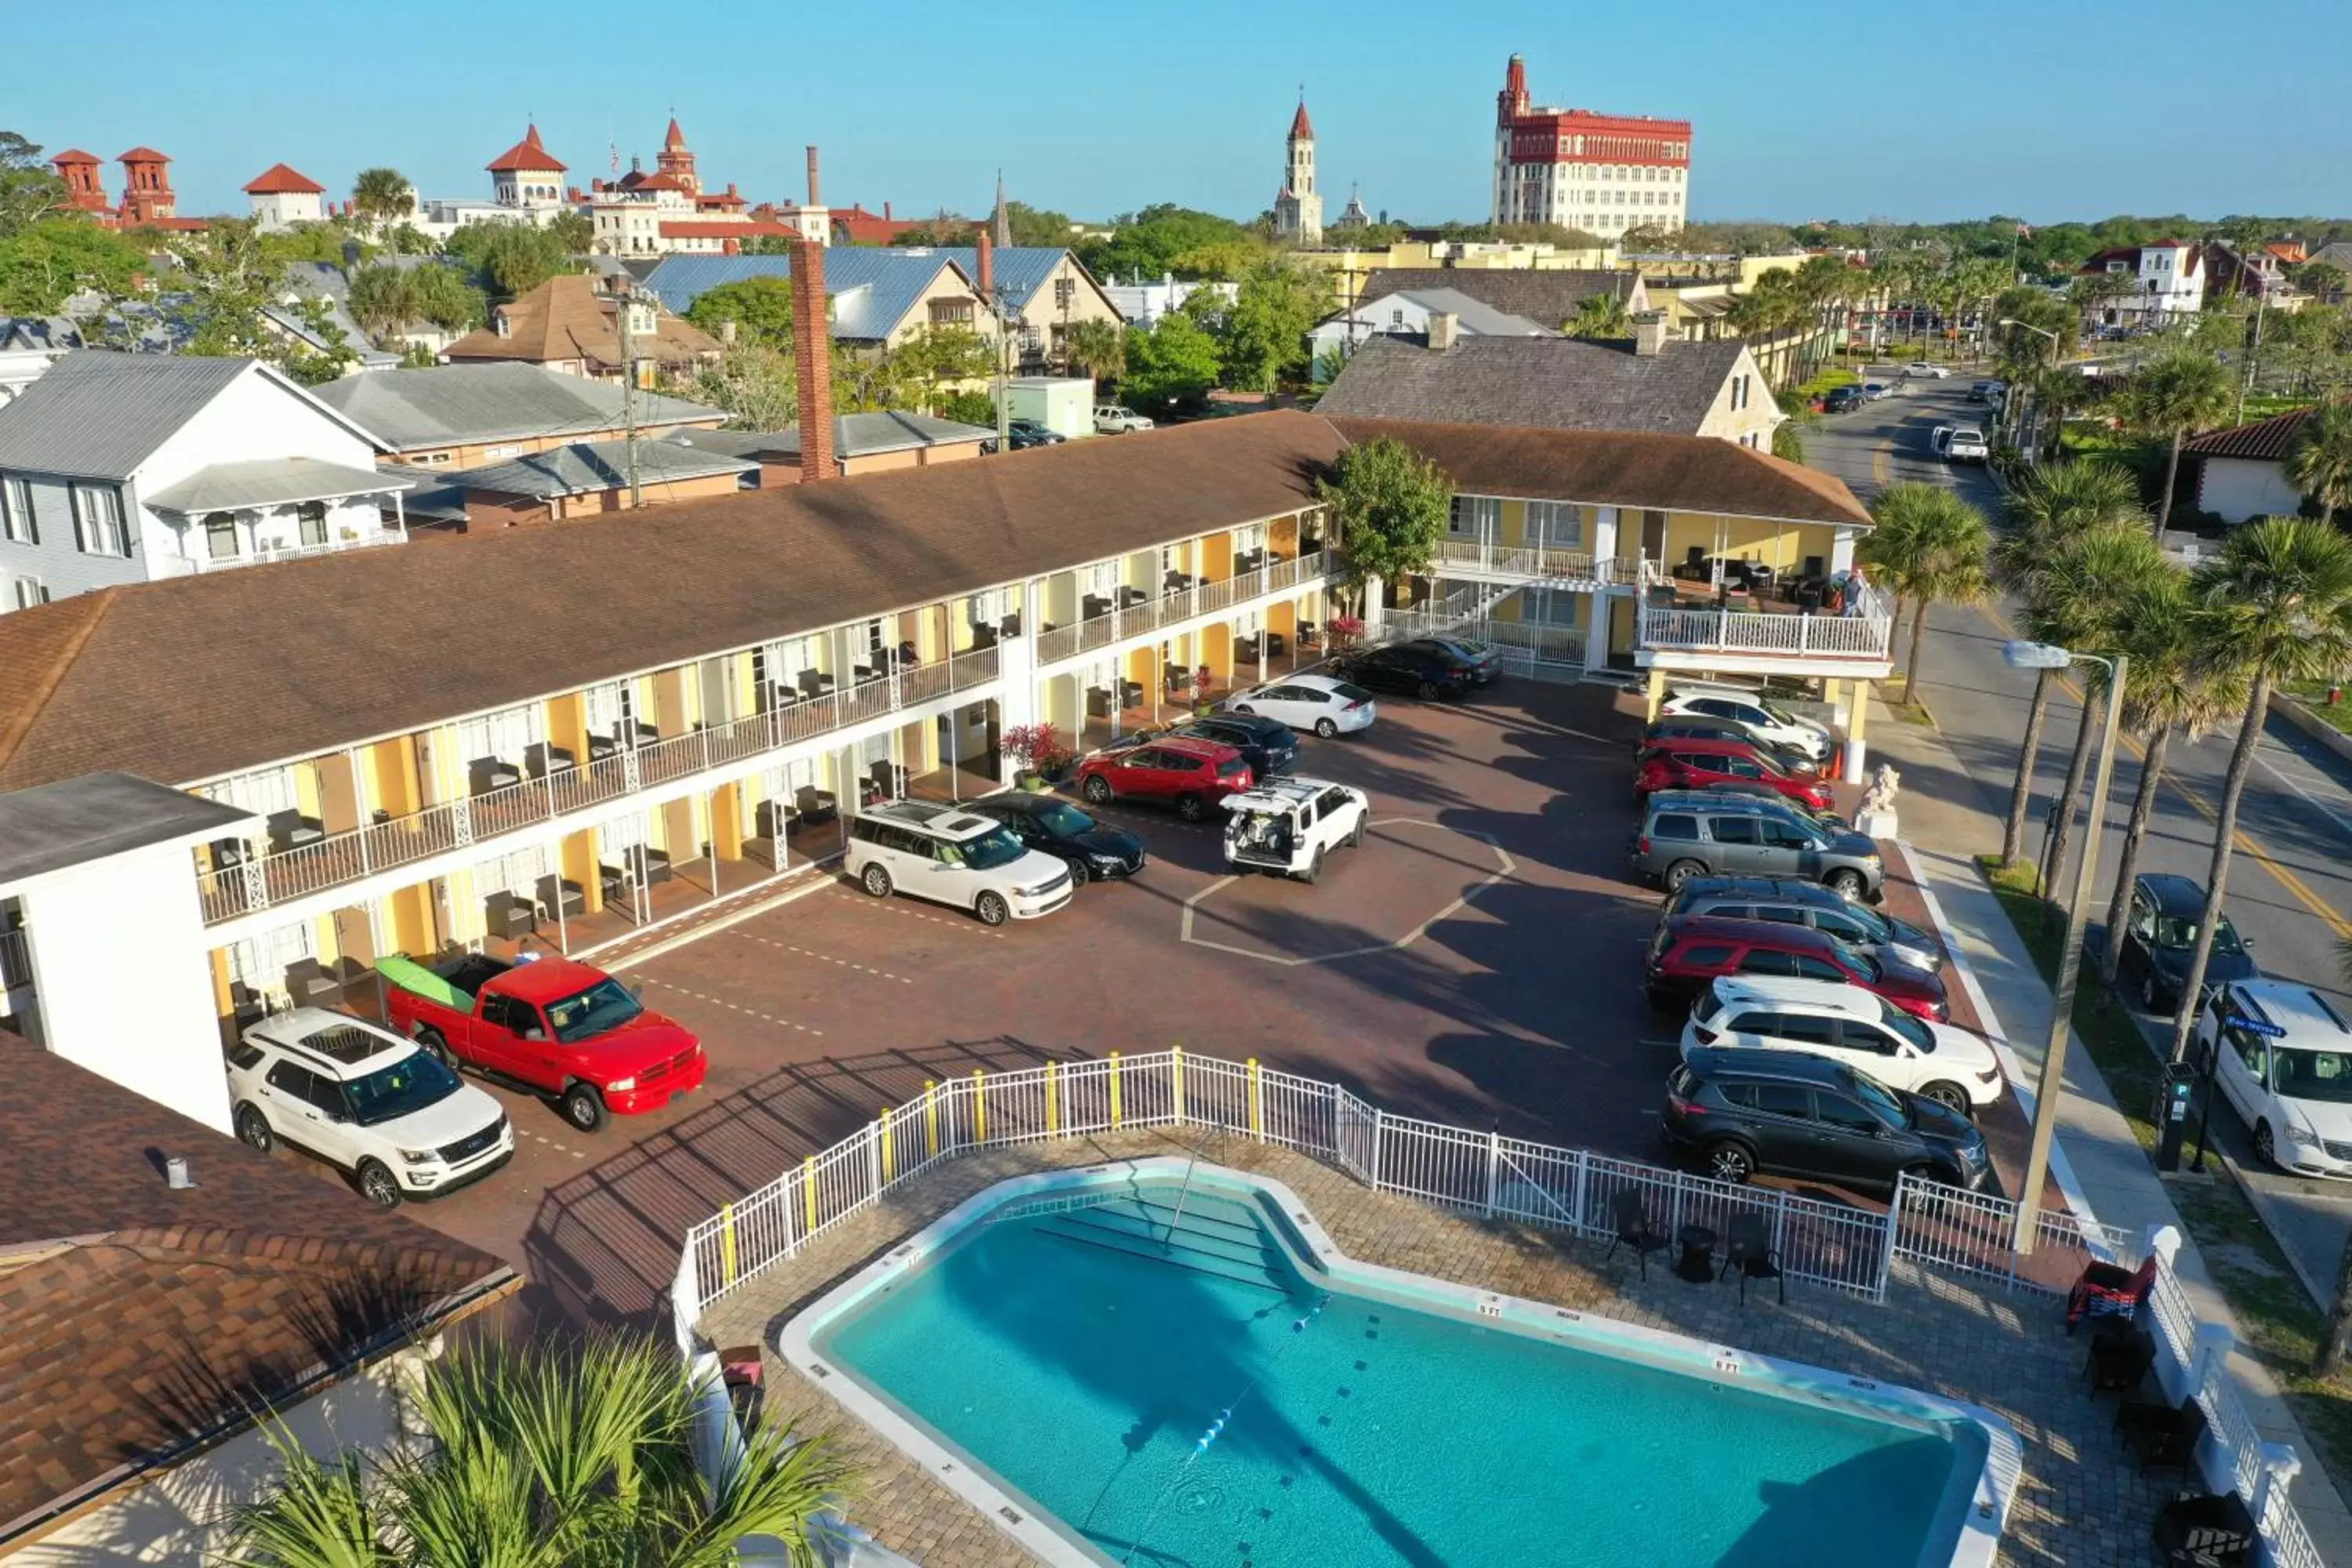 Bird's eye view in Historic Waterfront Marion Motor Lodge in downtown St Augustine